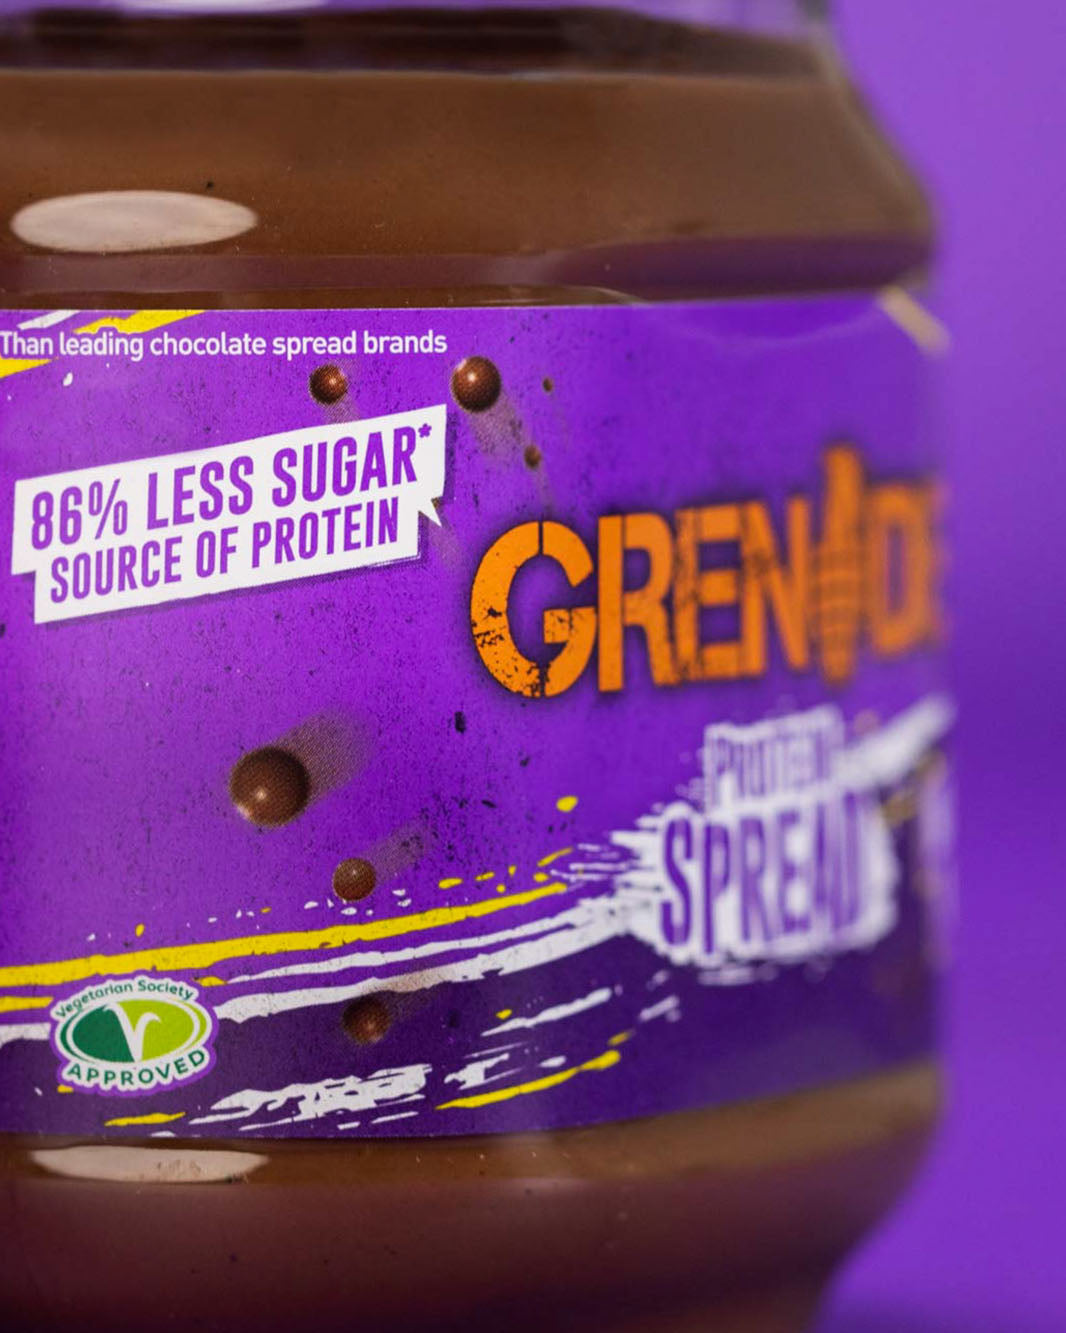 86% Less Sugar than leading chocolate spread brands